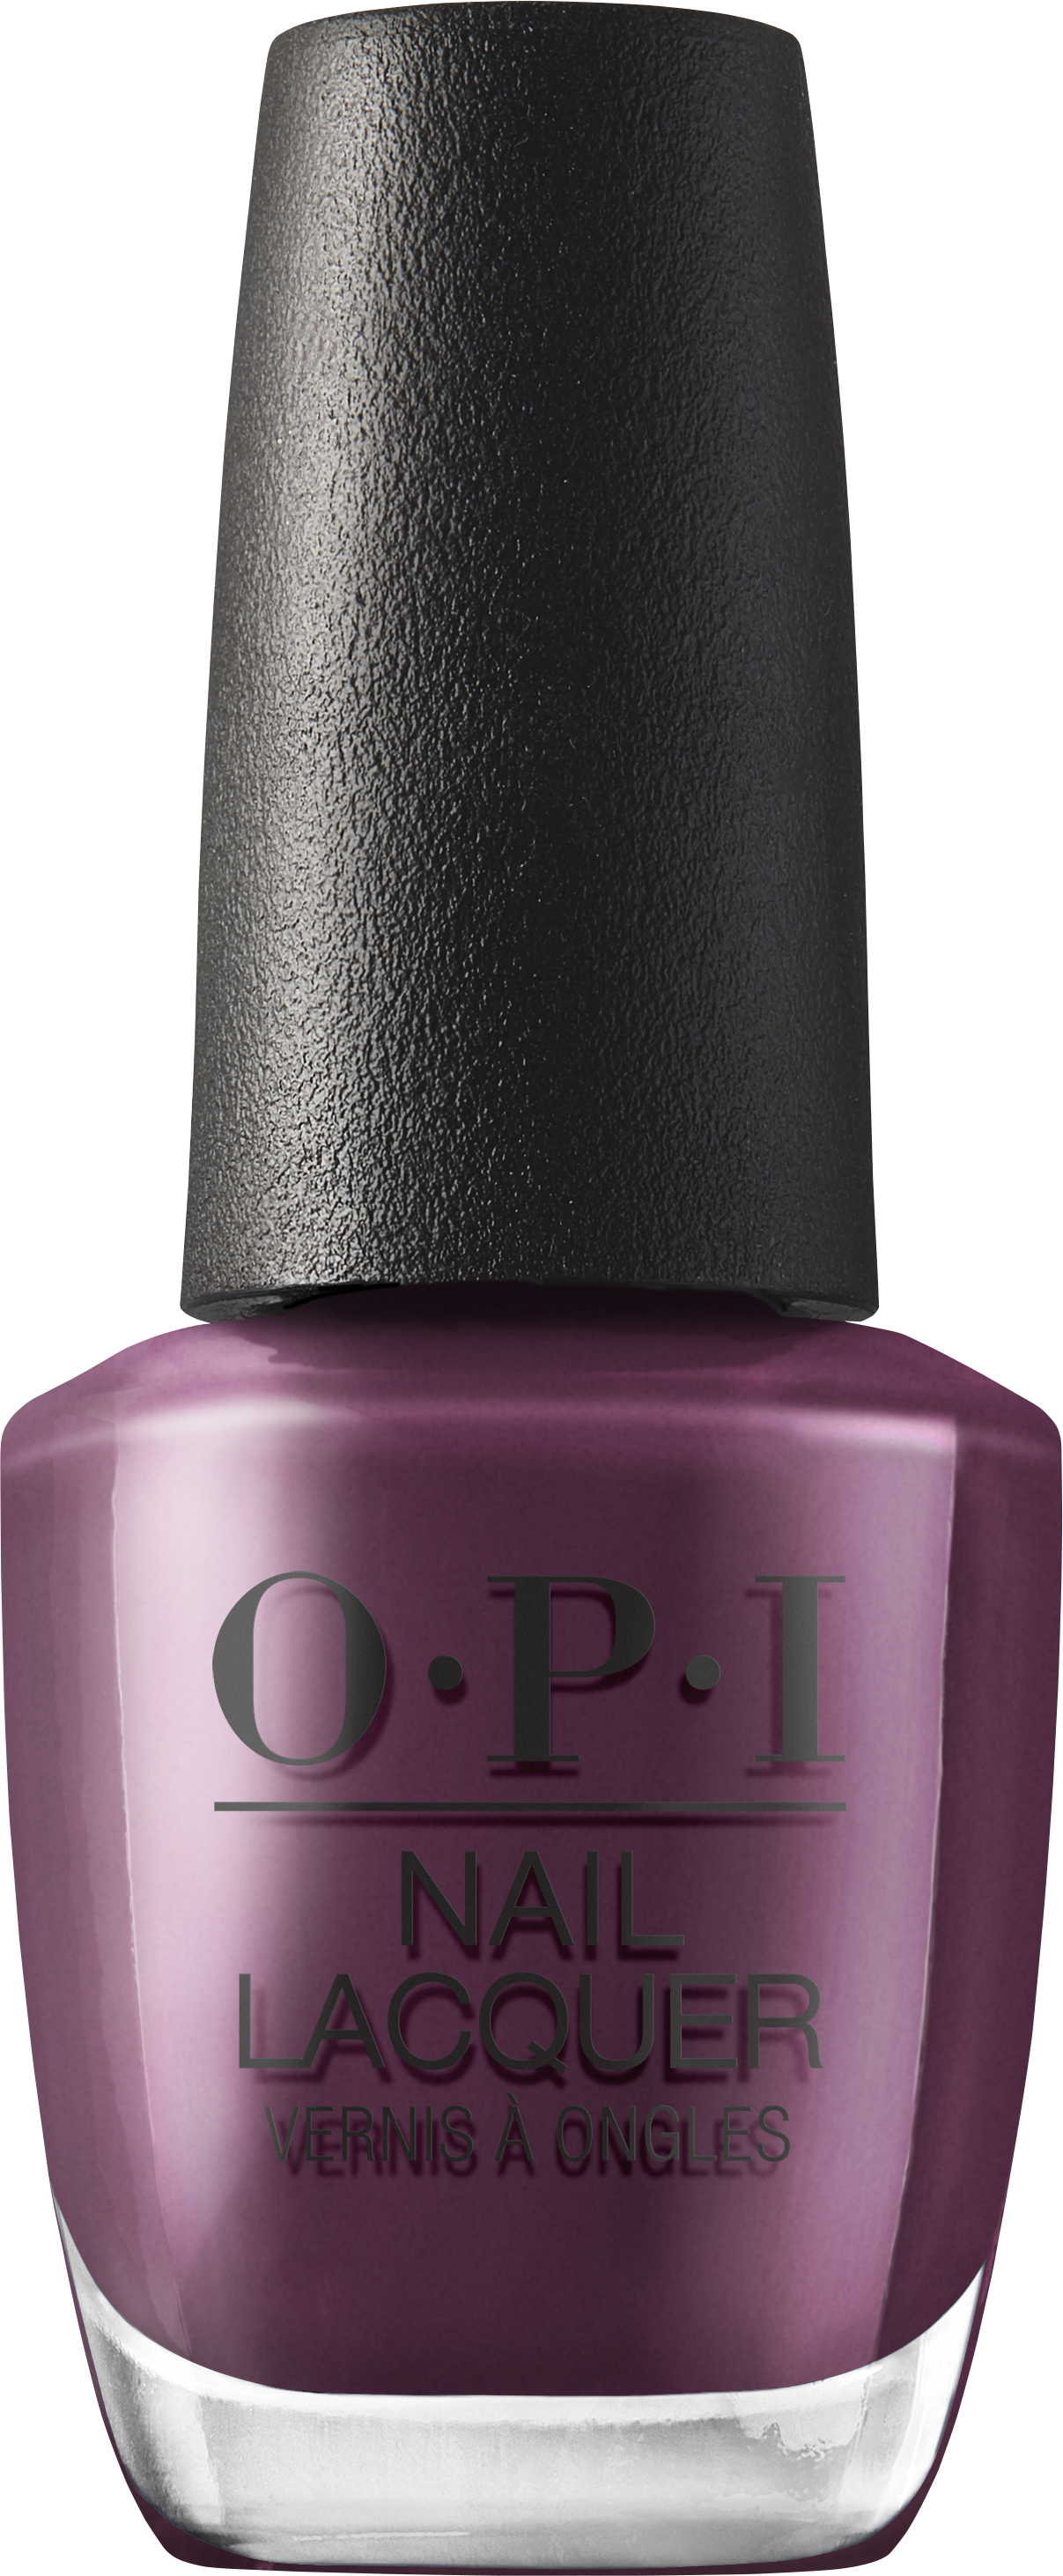 NL - OPI <3 to Party